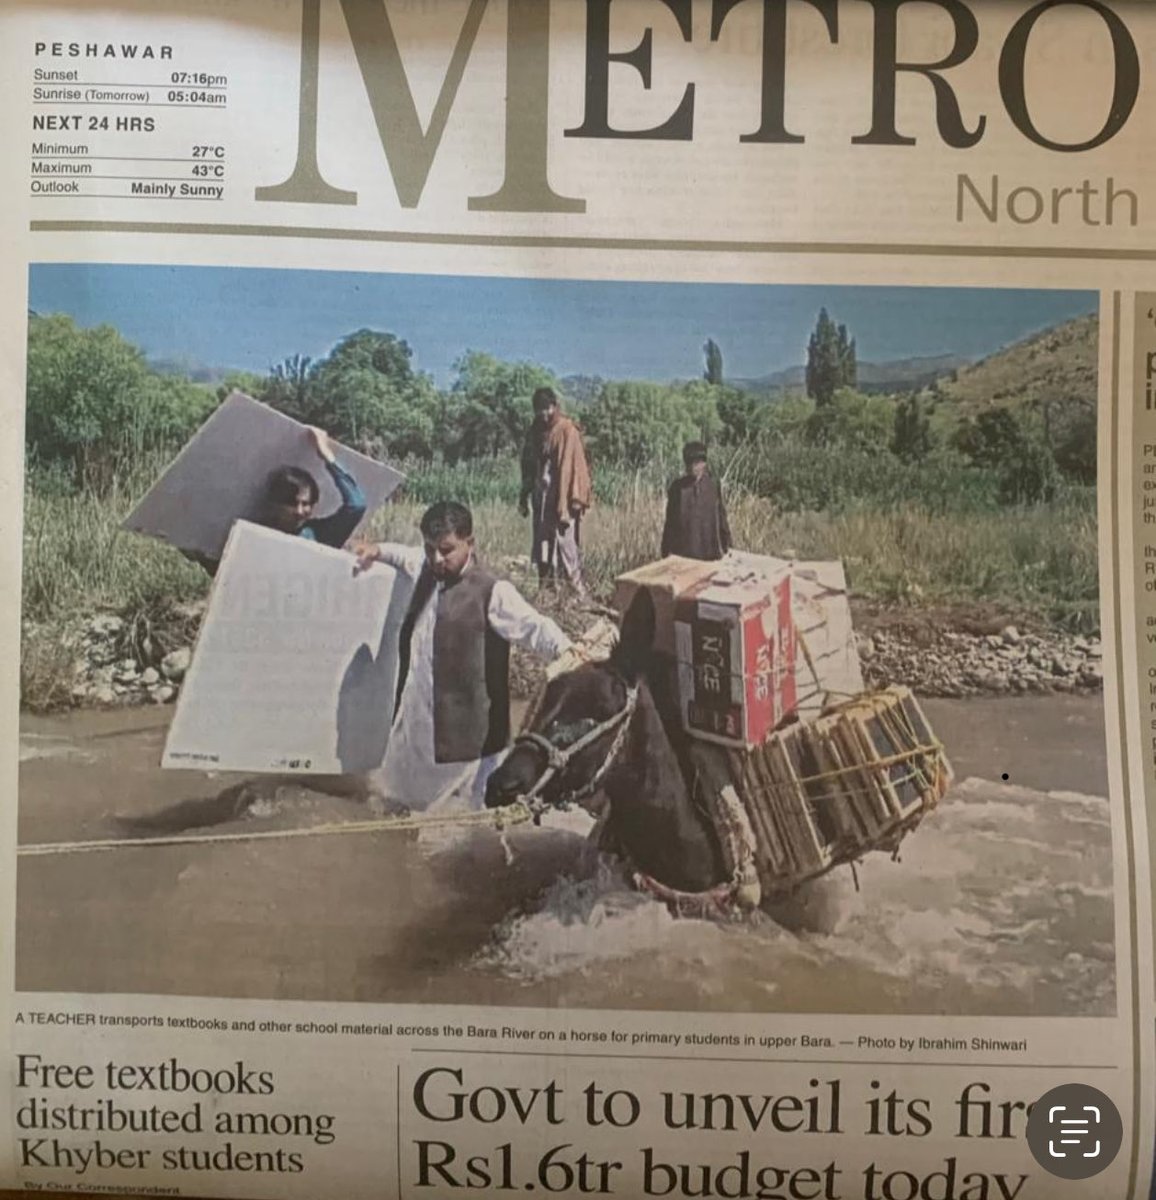 The state of affairs! Rs. 1.6 trillion budget and a horse wading through river to transport text books transportation to a school in Khyber, adjoining Peshawar.